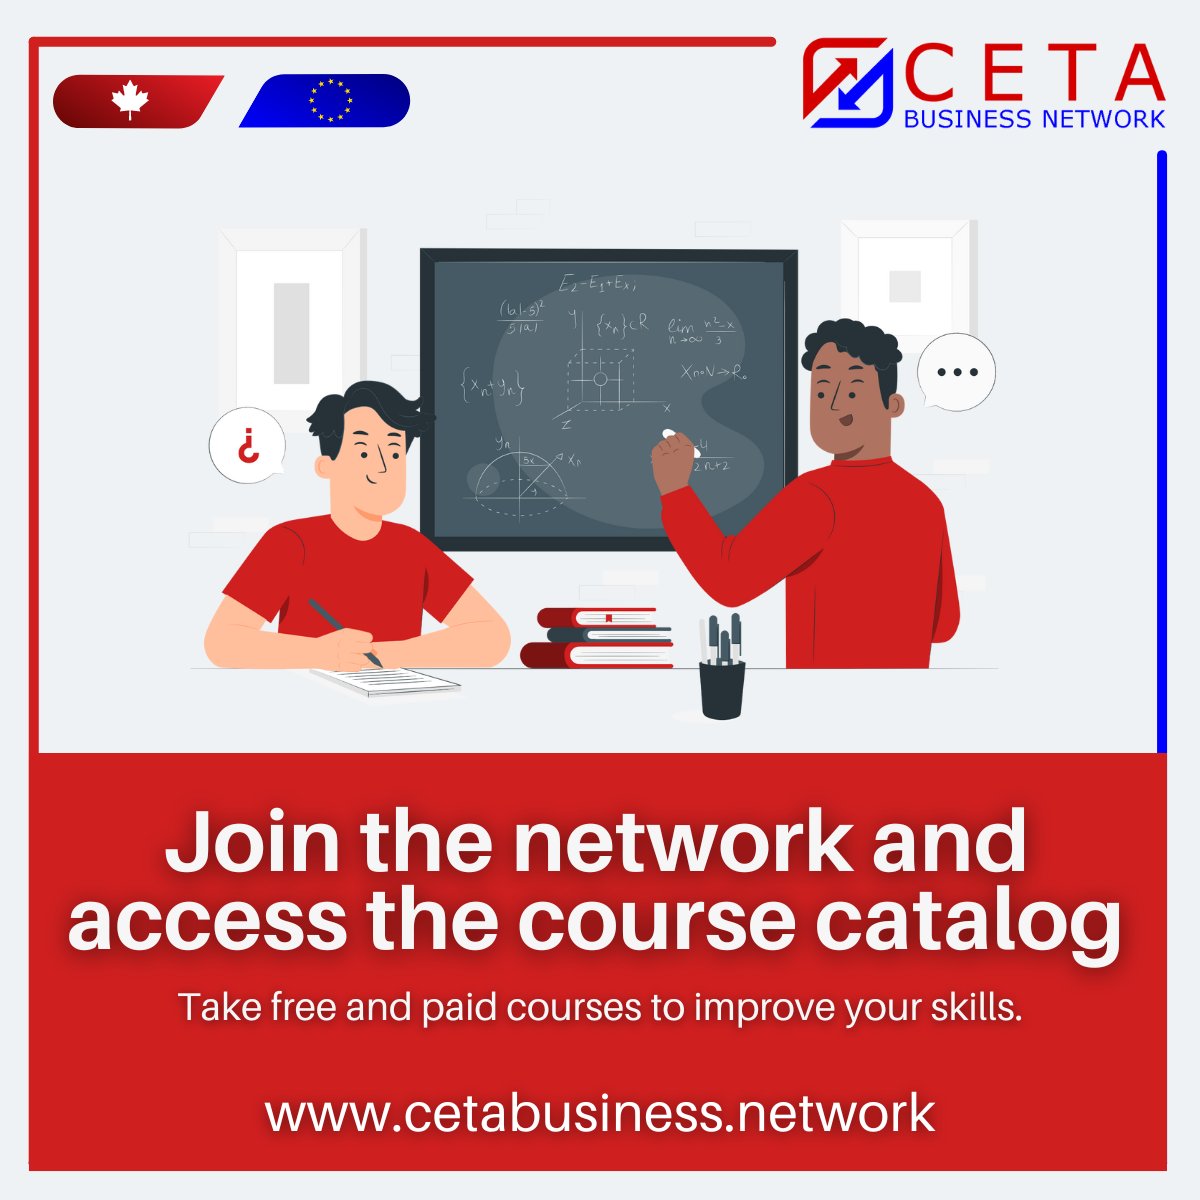 The #CETABusinessNetwork's #course section is a valuable resource for #professionals looking to expand their knowledge and expertise. Plus, become an #instructor and monetize your skills! 
cetabusiness.network/learning/

#ProfessionalDevelopment #Expertise